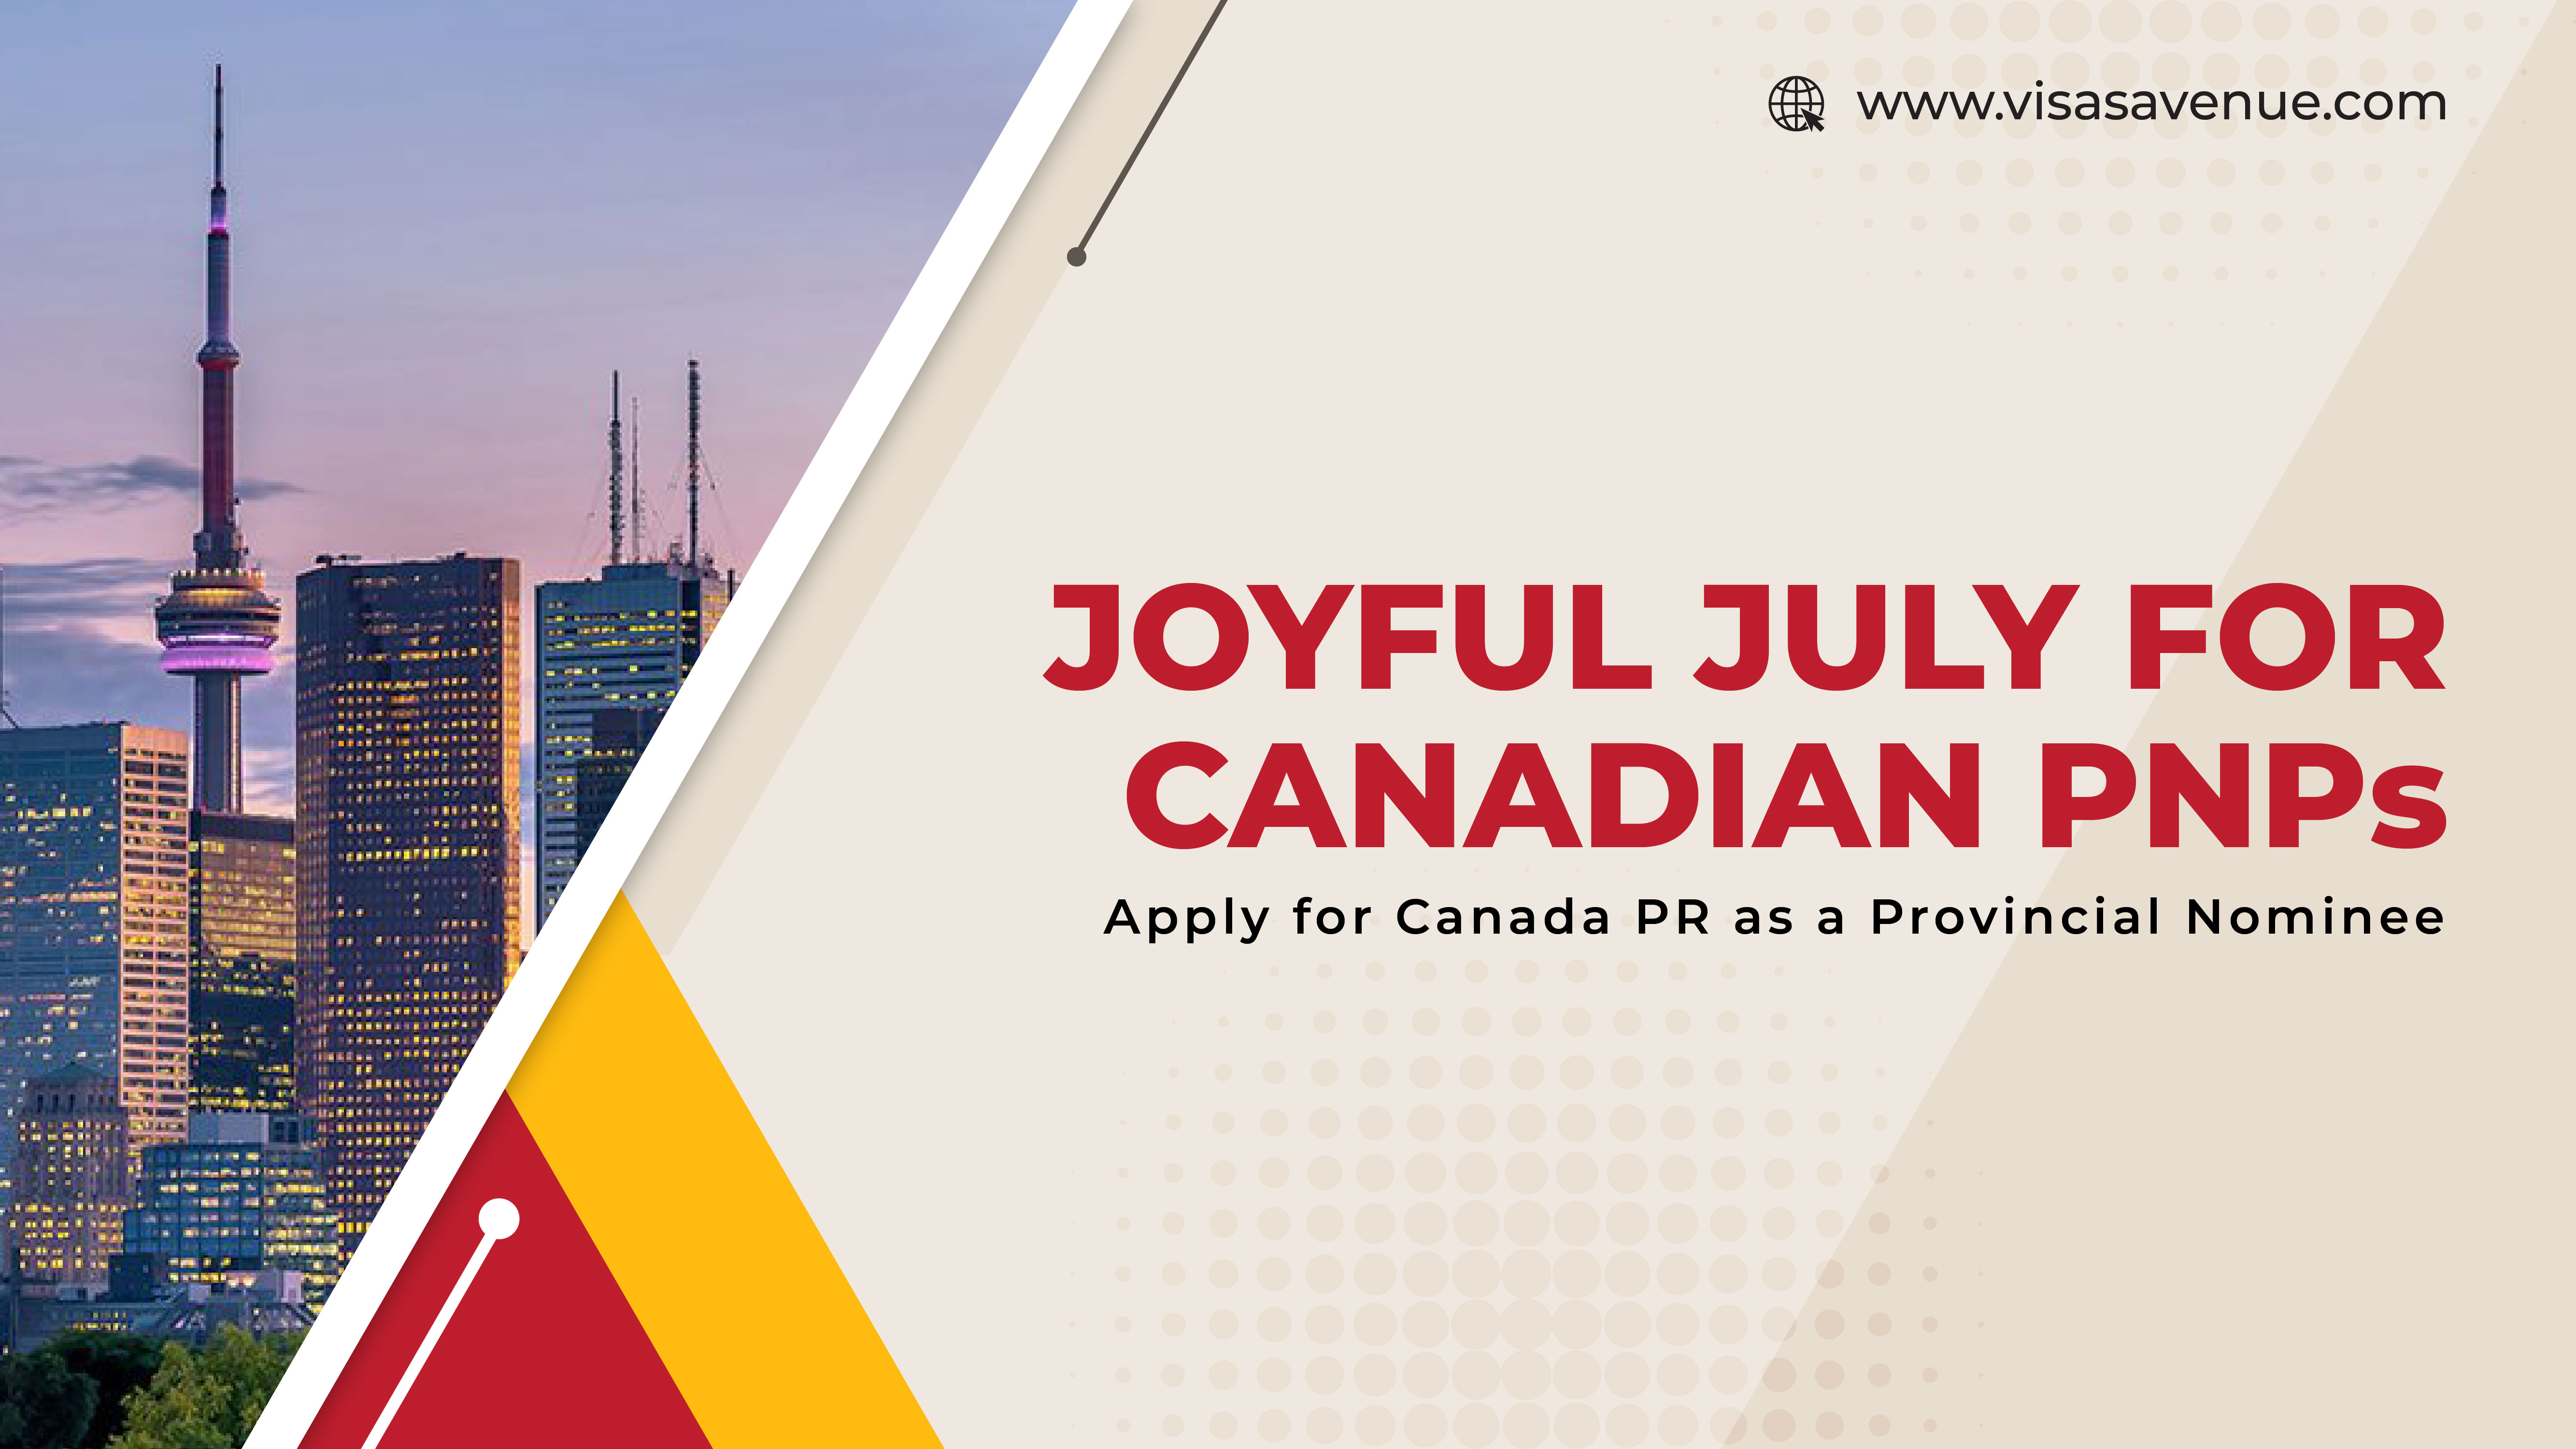 Joyful July for Canadian PNPs- Apply for Canada PR as a Provincial Nominee